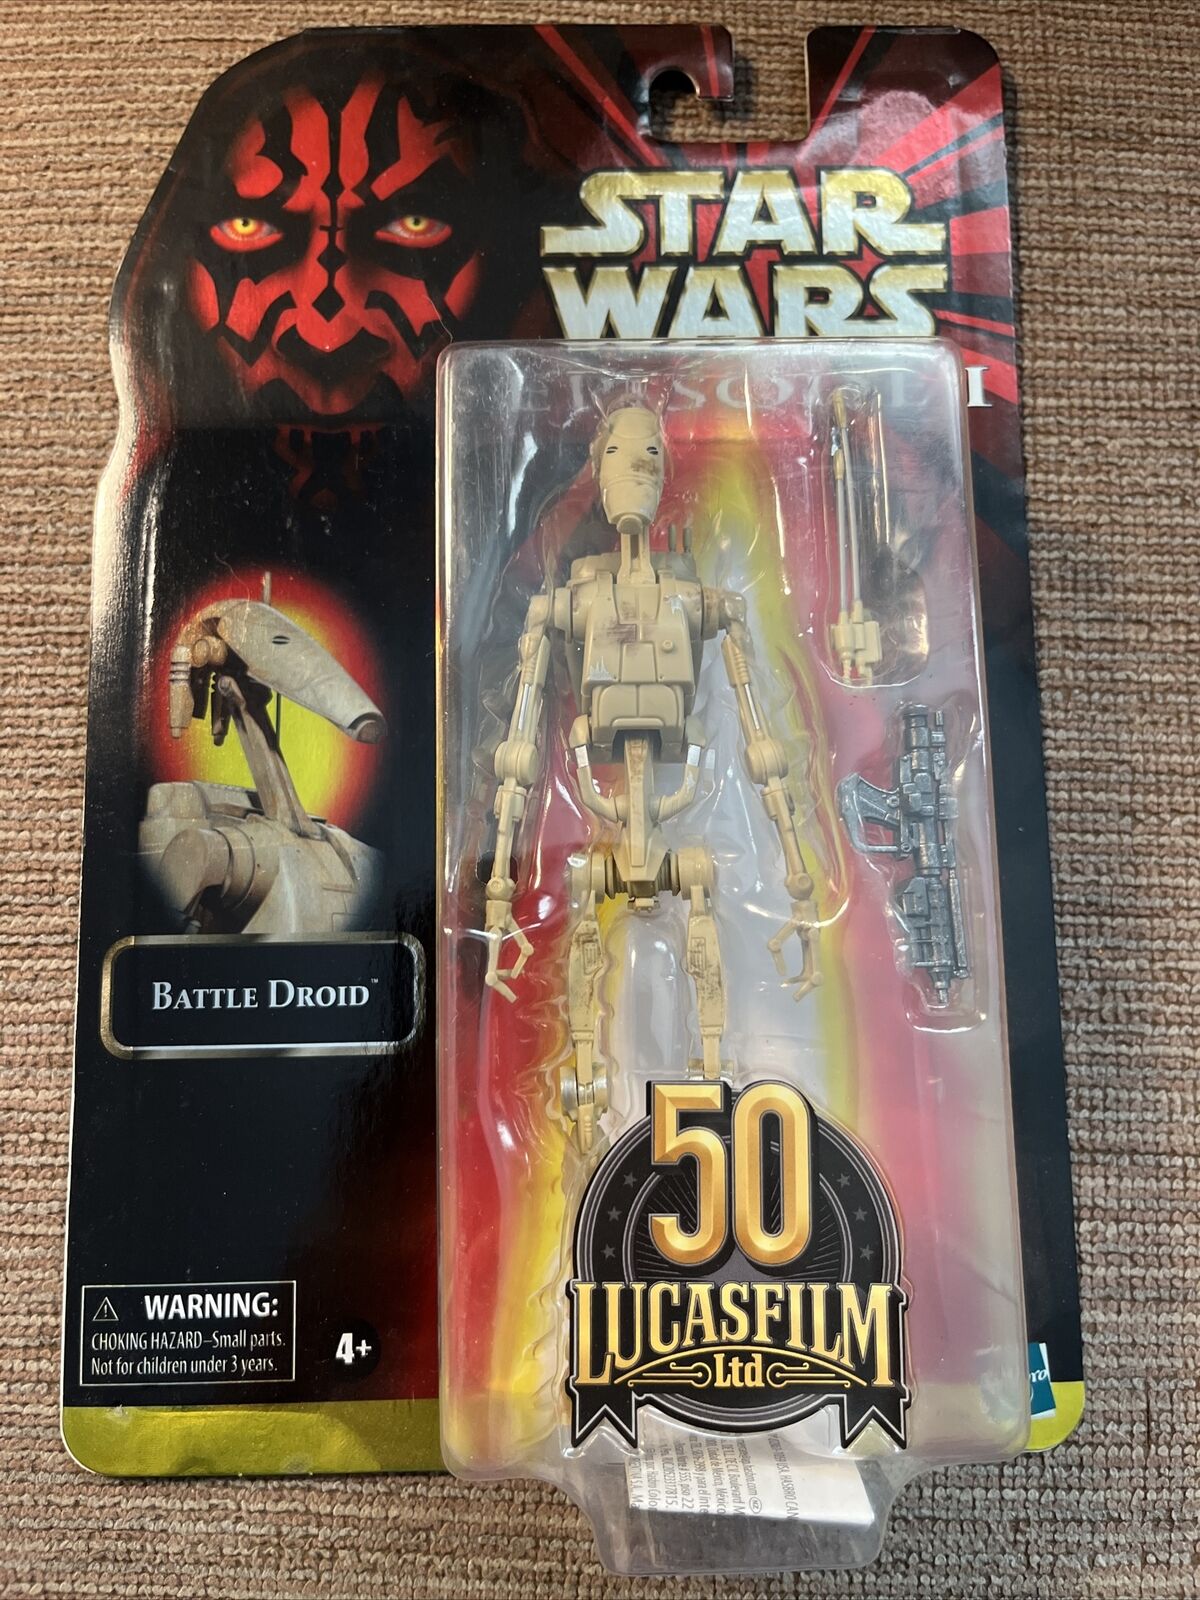 StarWars Battle Droid (Episode I) 6 inch action figure 50th Anniversary